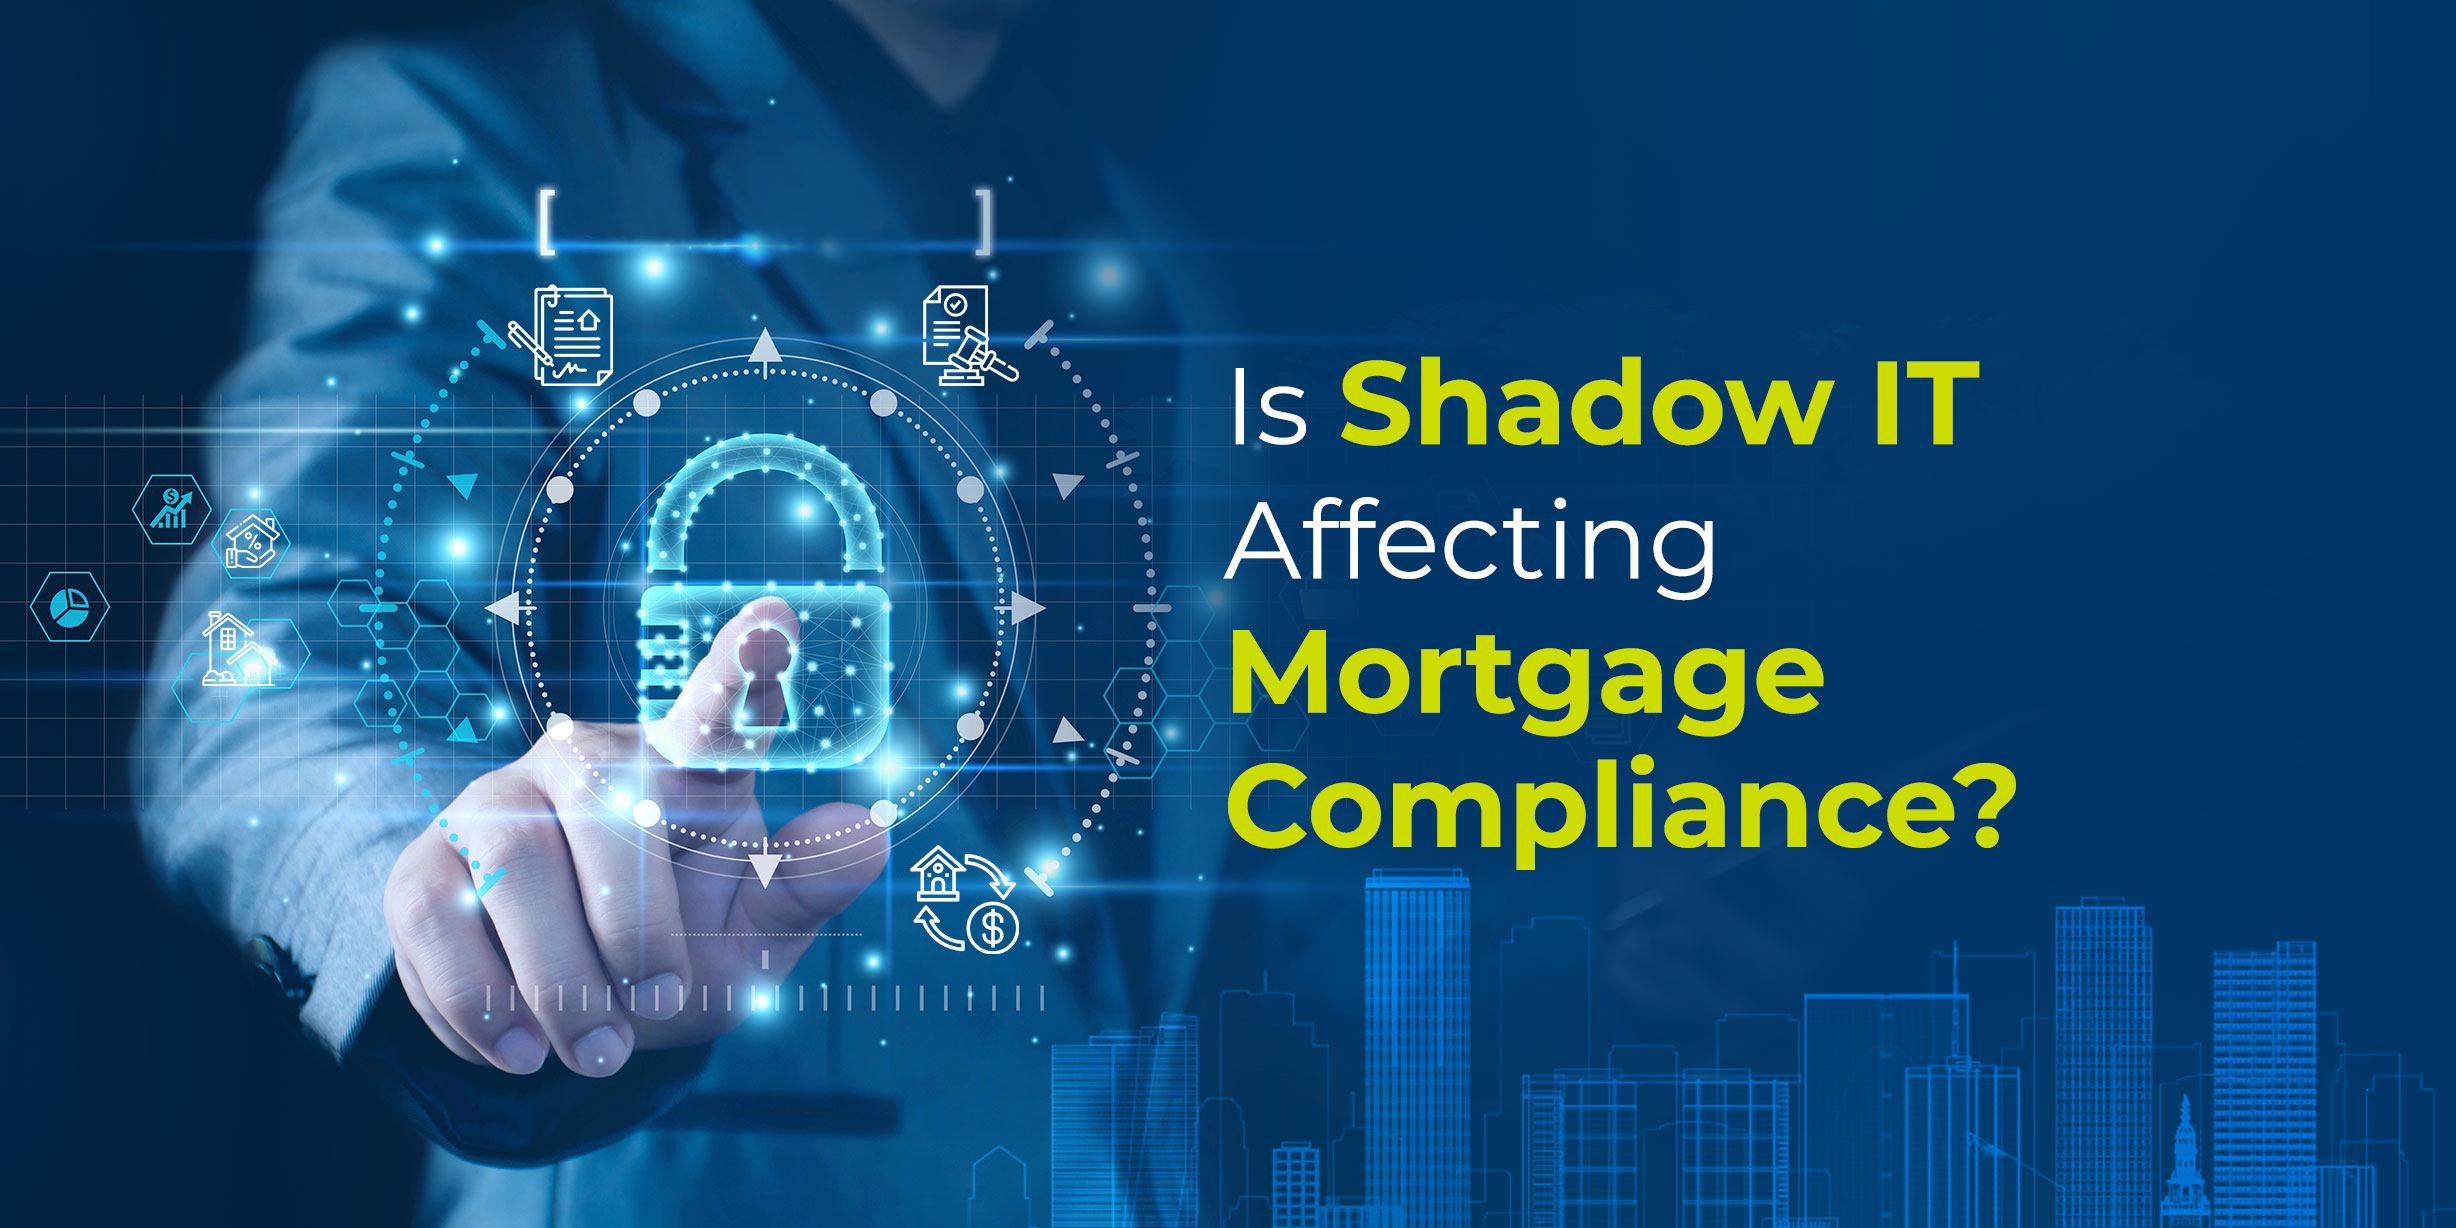 Is Shadow IT Affecting Mortgage Compliance?